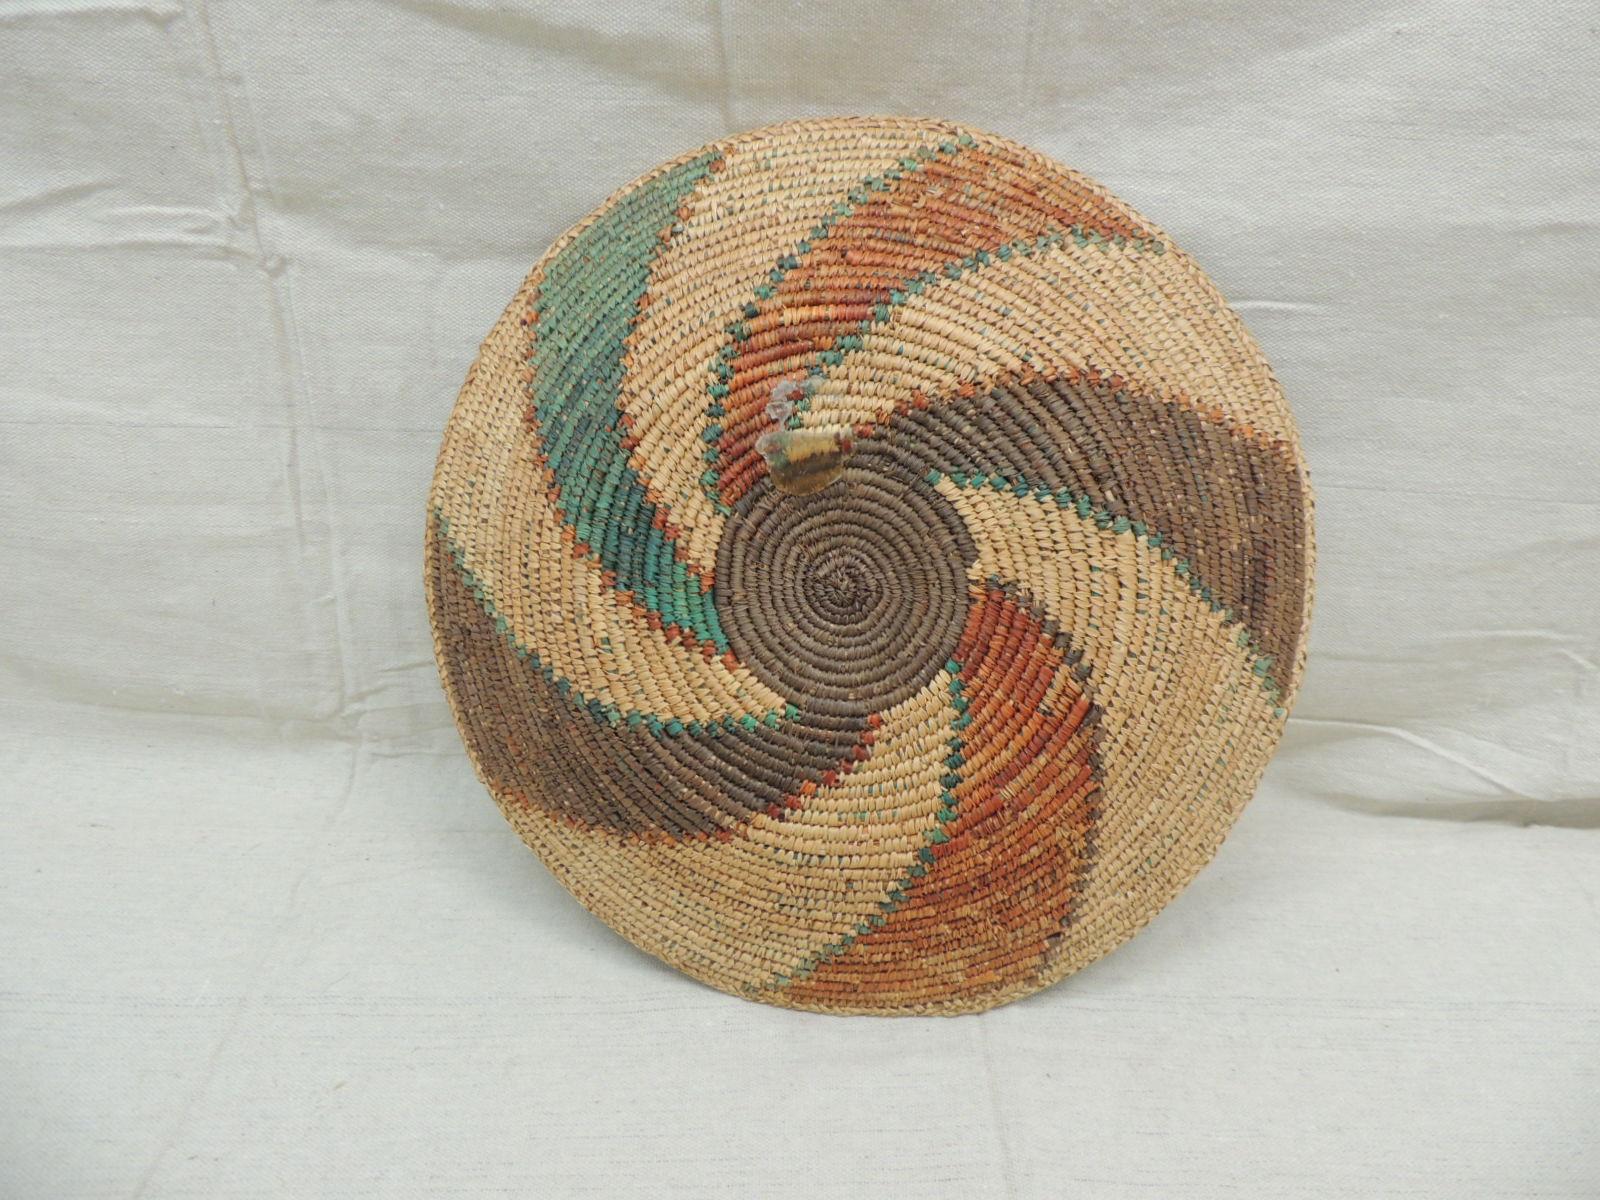 African Vintage Green and Brown Coiled Decorative Round Basket